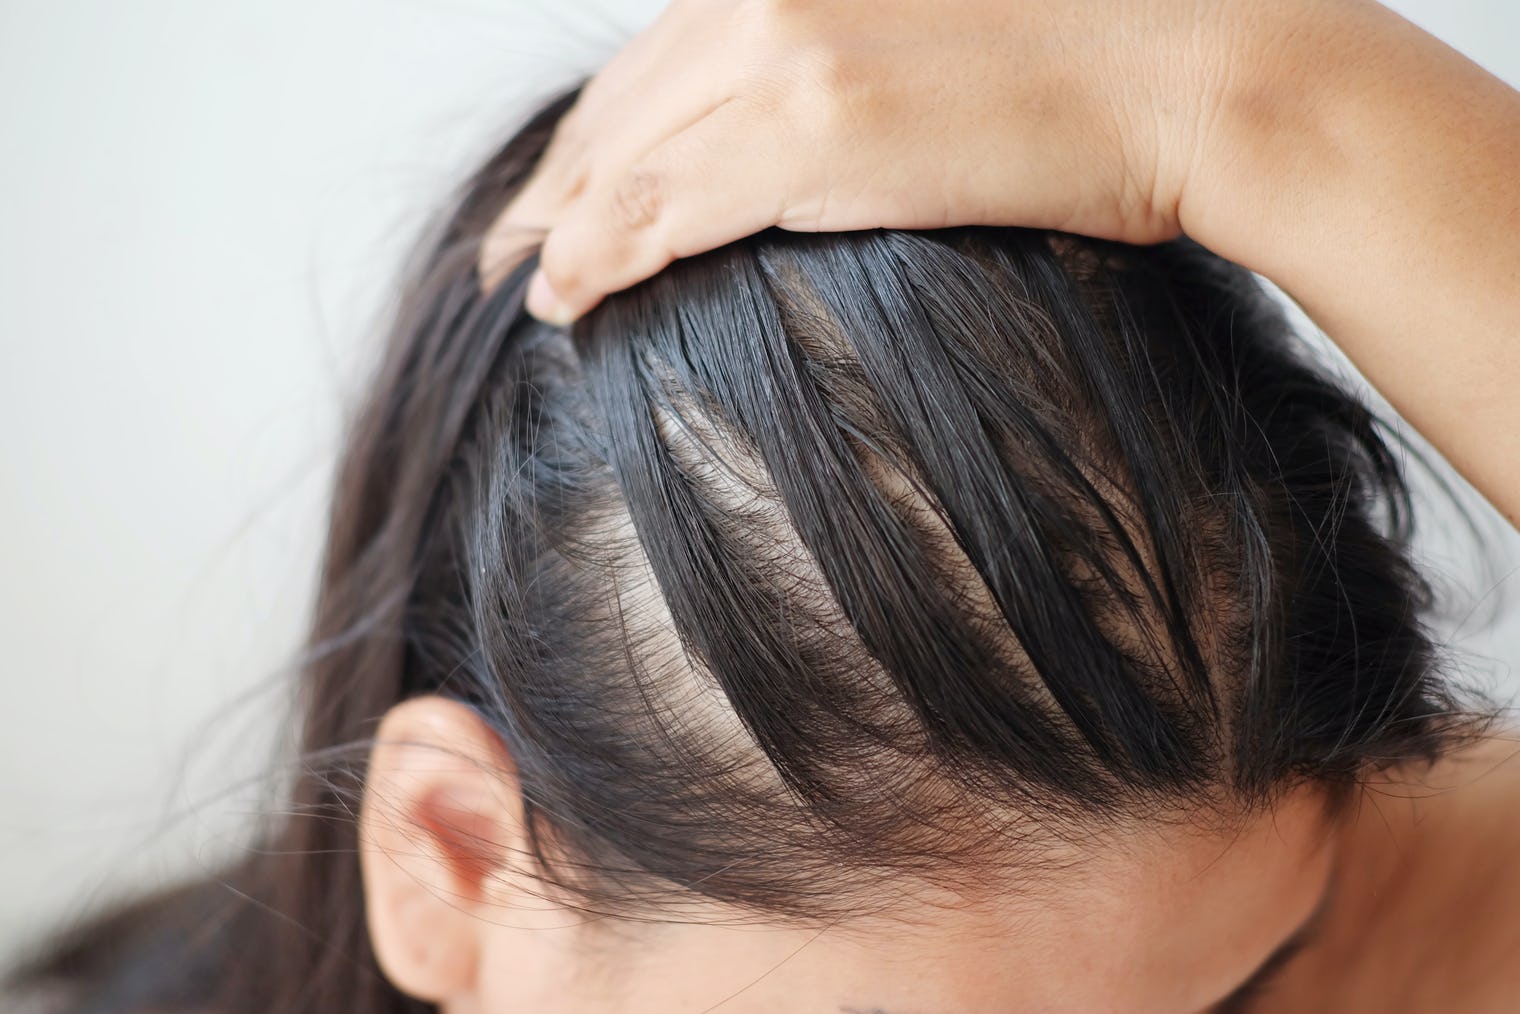 How To Tell If Your Hair Is Thinning &  7 Things That Can Help